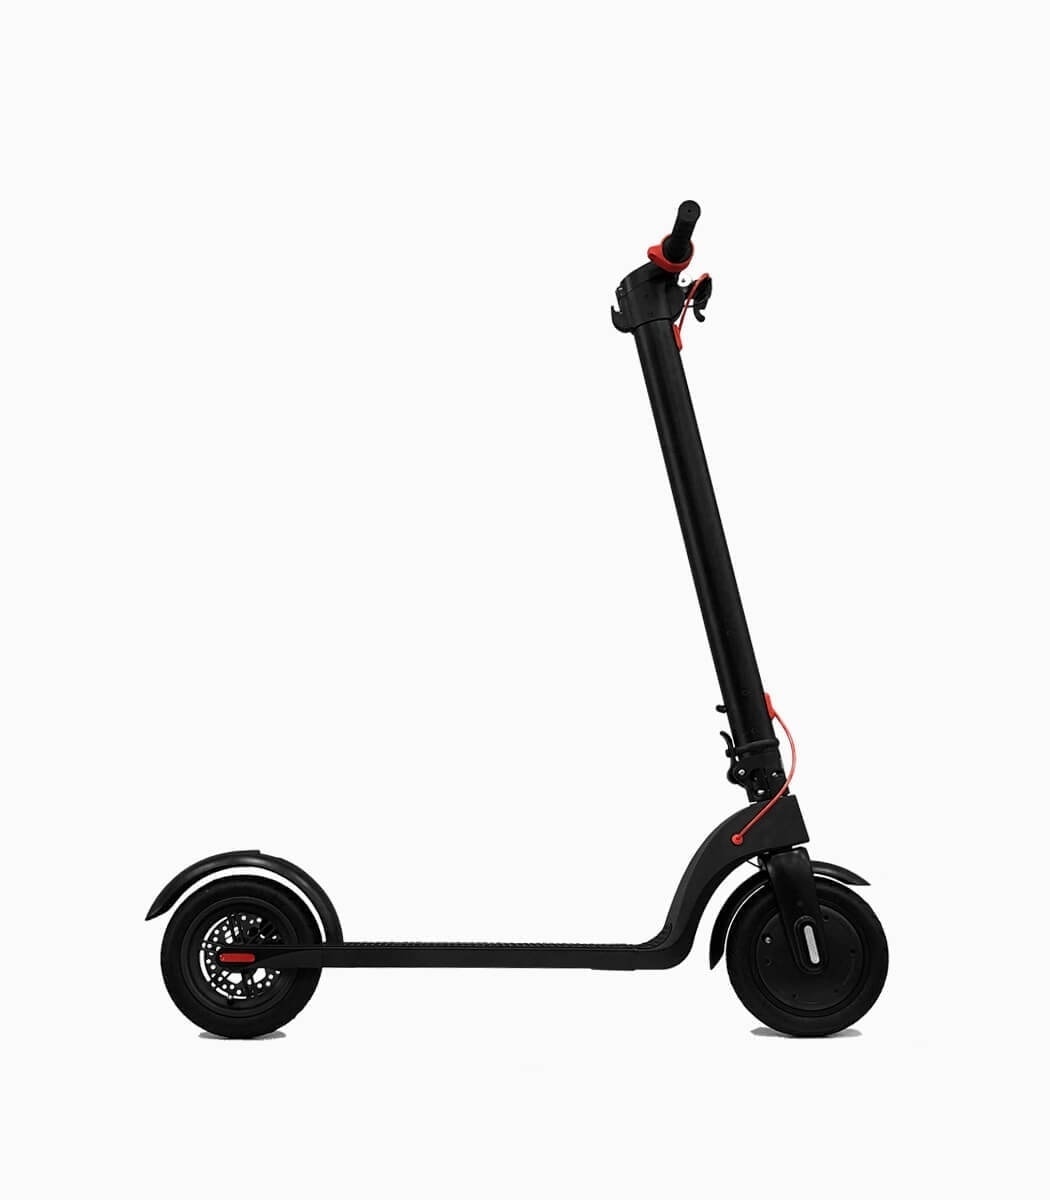 MOBOT X7 (BLACK6.4AH) UL2272 electric scooter right